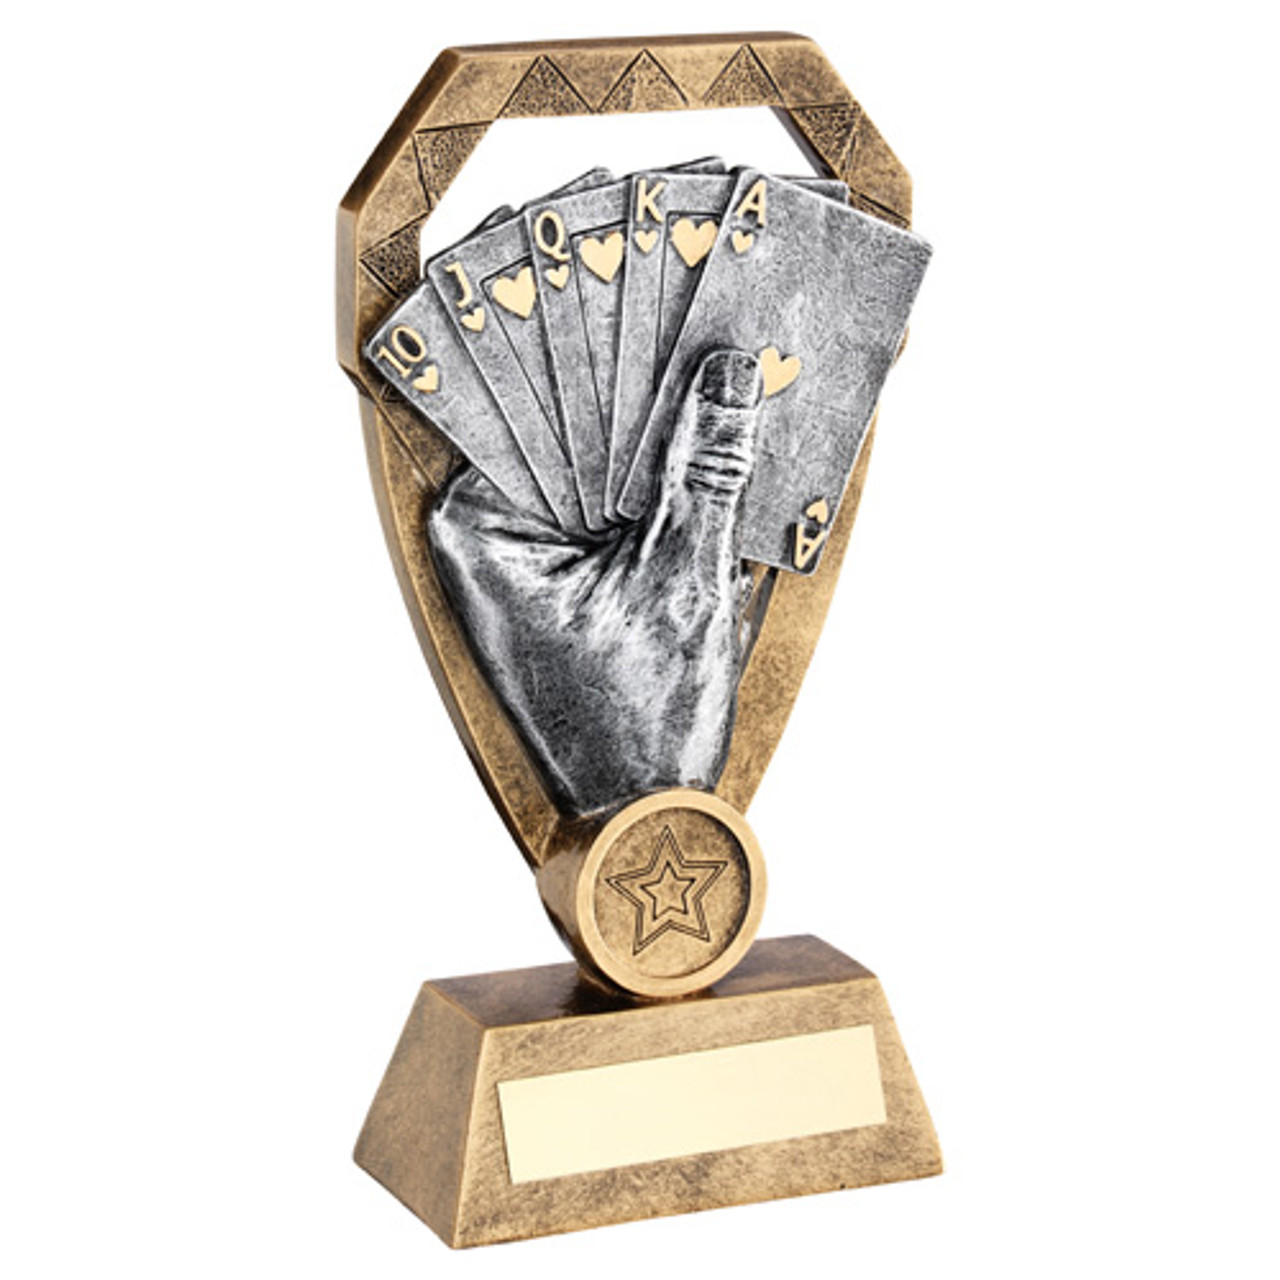 Royal Flush Card Games Poker Bridge Blackjack Diamond Trophy. A fabulous affordable prize with gold engraving plate and custom club logo/ centre insert.